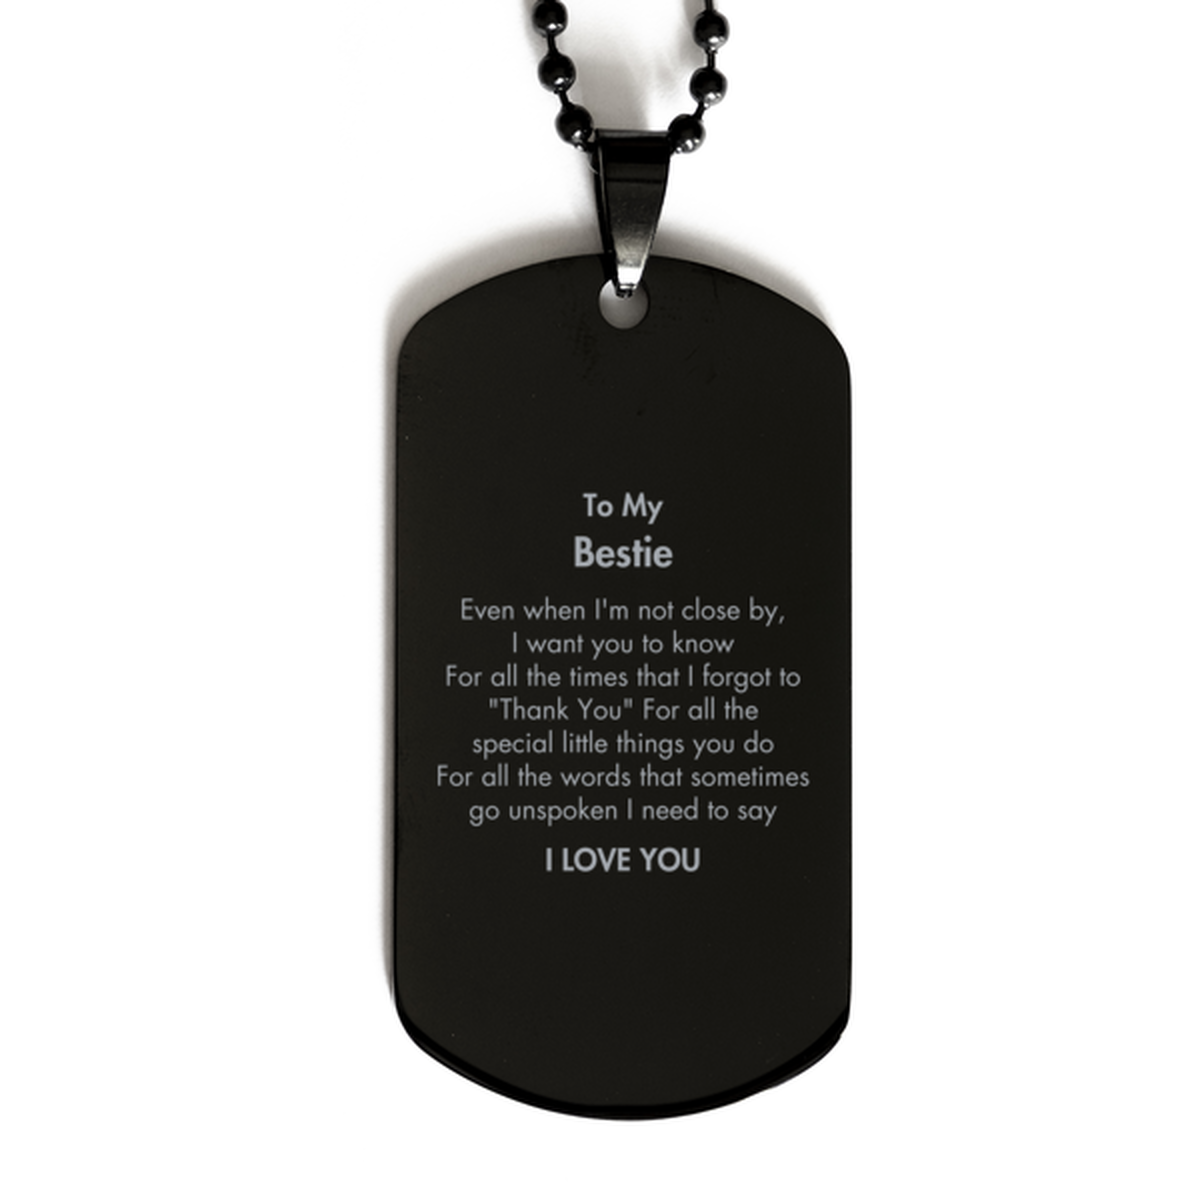 Thank You Gifts for Bestie, Keepsake Black Dog Tag Gifts for Bestie Birthday Mother's day Father's Day Bestie For all the words That sometimes go unspoken I need to say I LOVE YOU